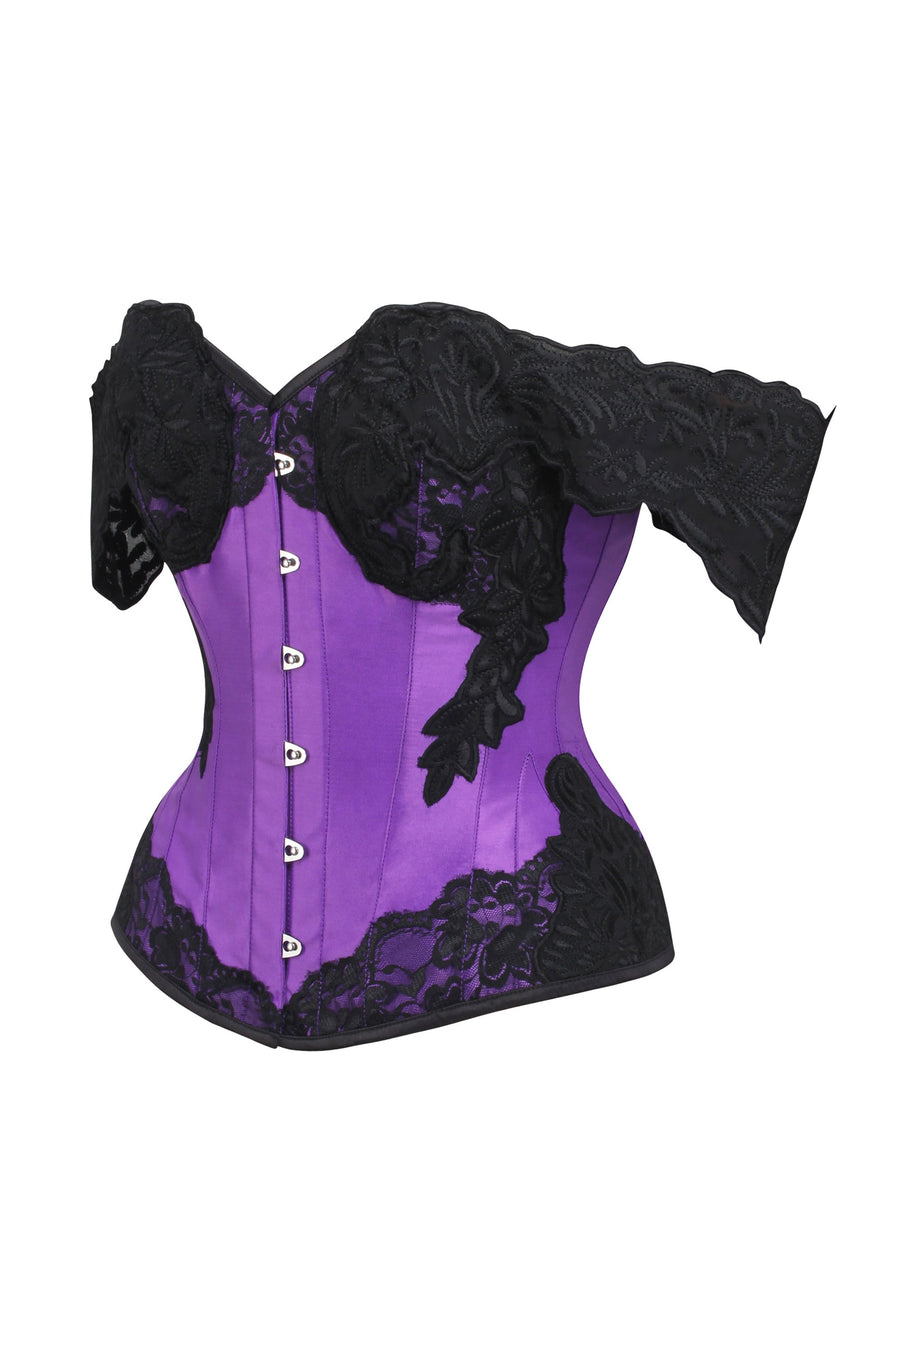 Clementine Black Satin and Lace Overbust Corset with Spaghetti